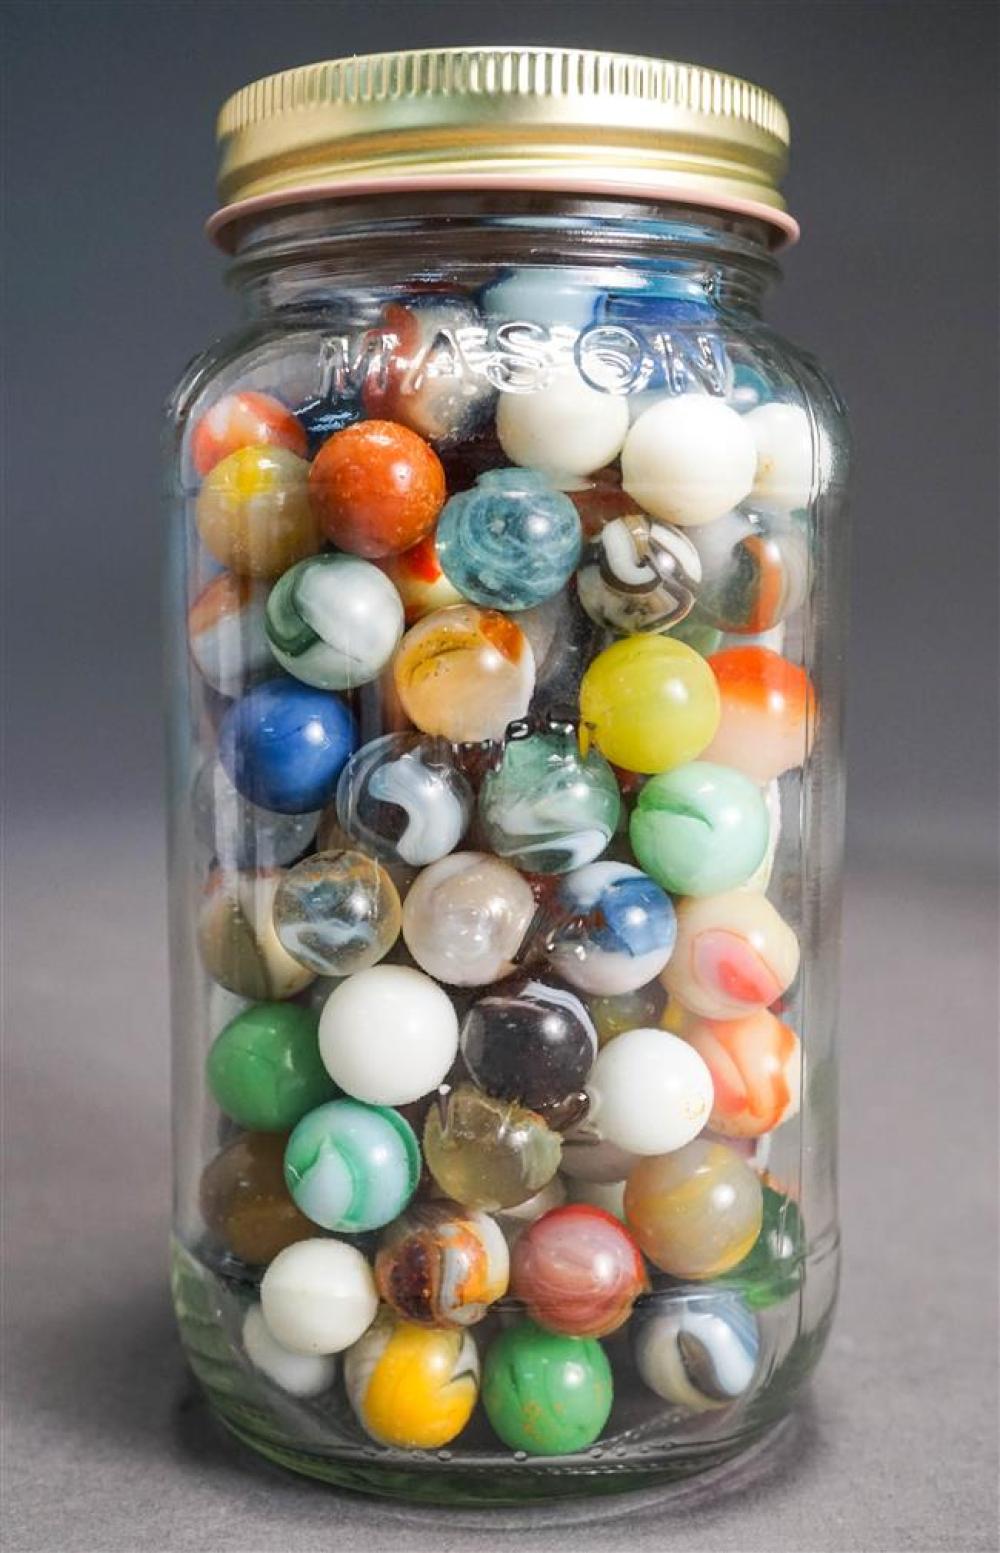 COLLECTION OF MARBLESCollection of Marbles